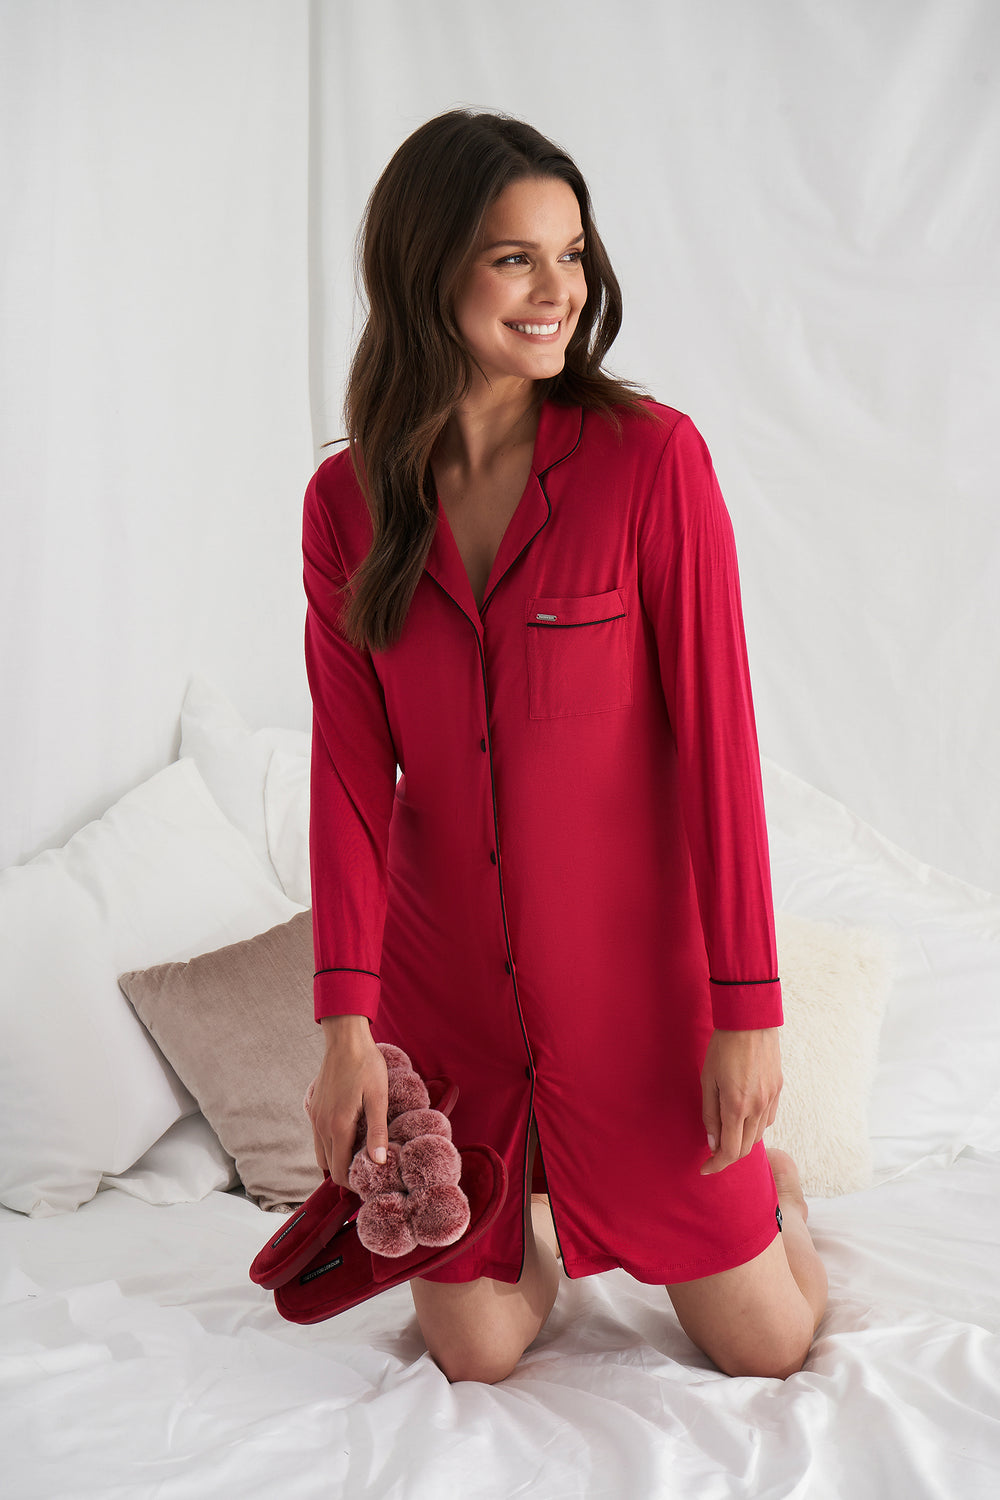 Women's Bamboo Nightshirt in Scarlet Red with functional button up fastening, revere collar and contrast colour piping from Pretty You London